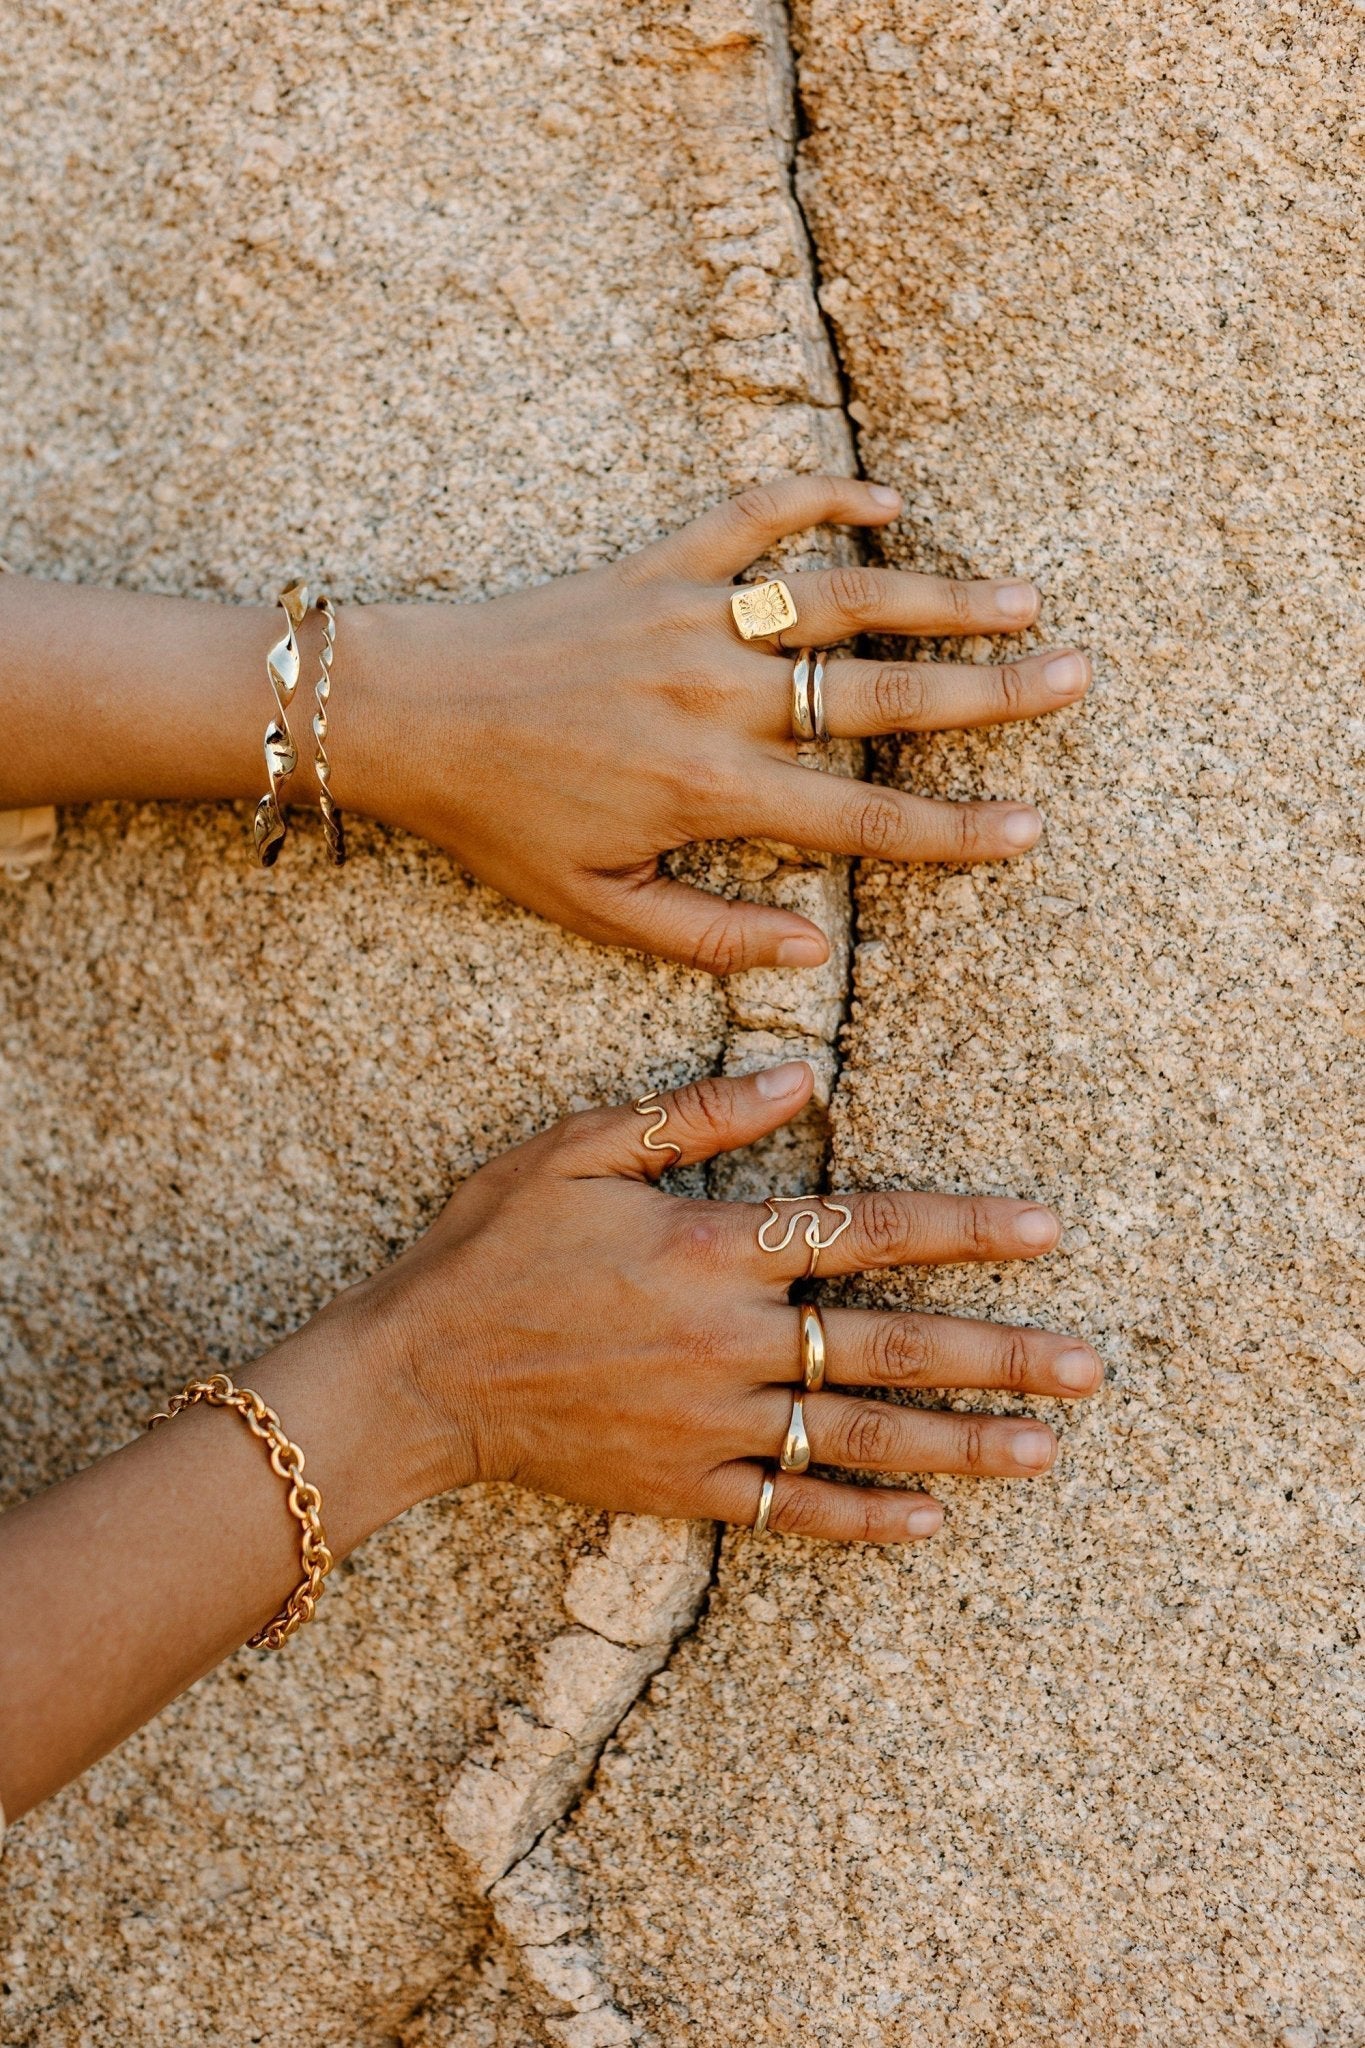 This luxurious, golden cable chain bracelet is the perfect addition to your bracelet rotation. Equally beautiful styled alone or layered. Heavy gold plated with lobster clasp. Designed and handmade in Downtown Los Angeles